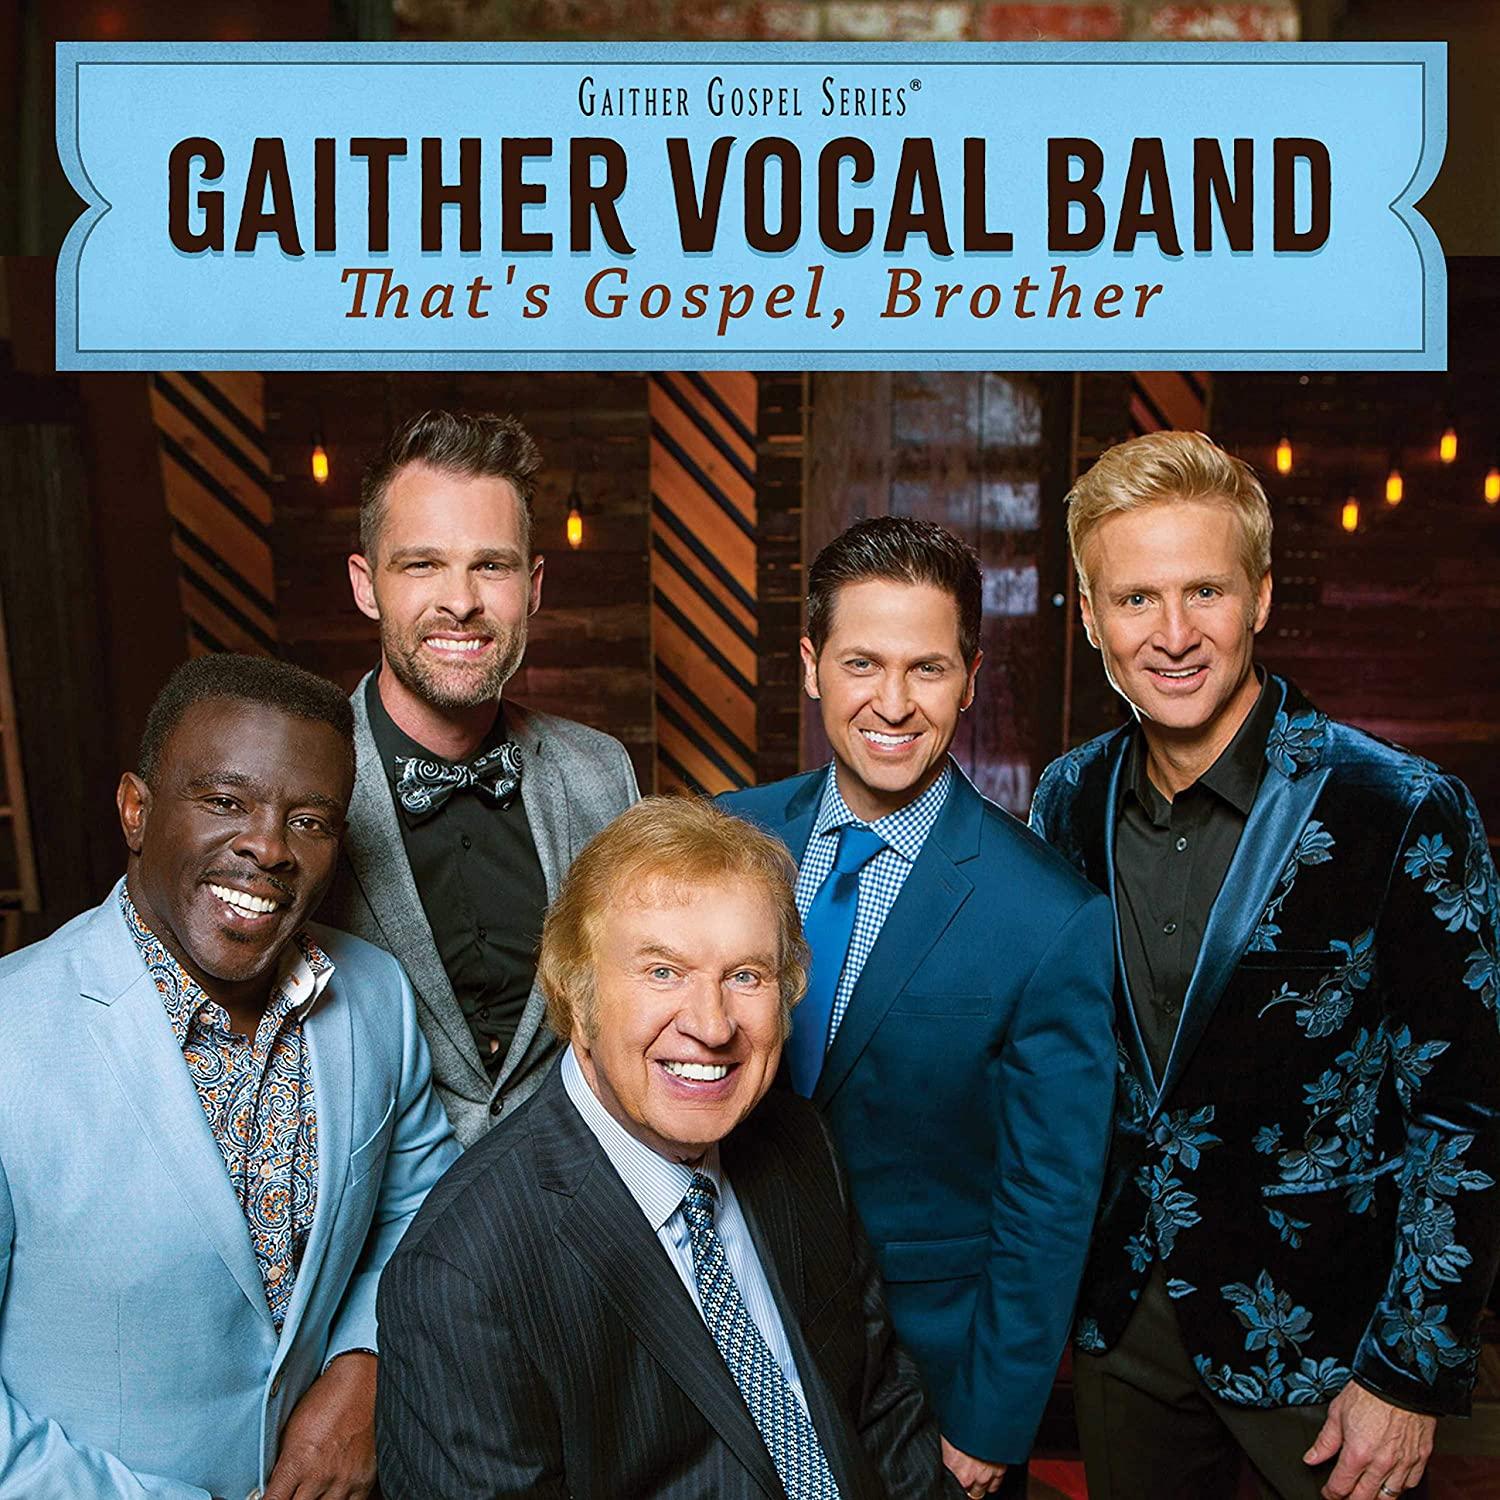 Todd Suttles, left, on the cover of the Gaither Vocal Band